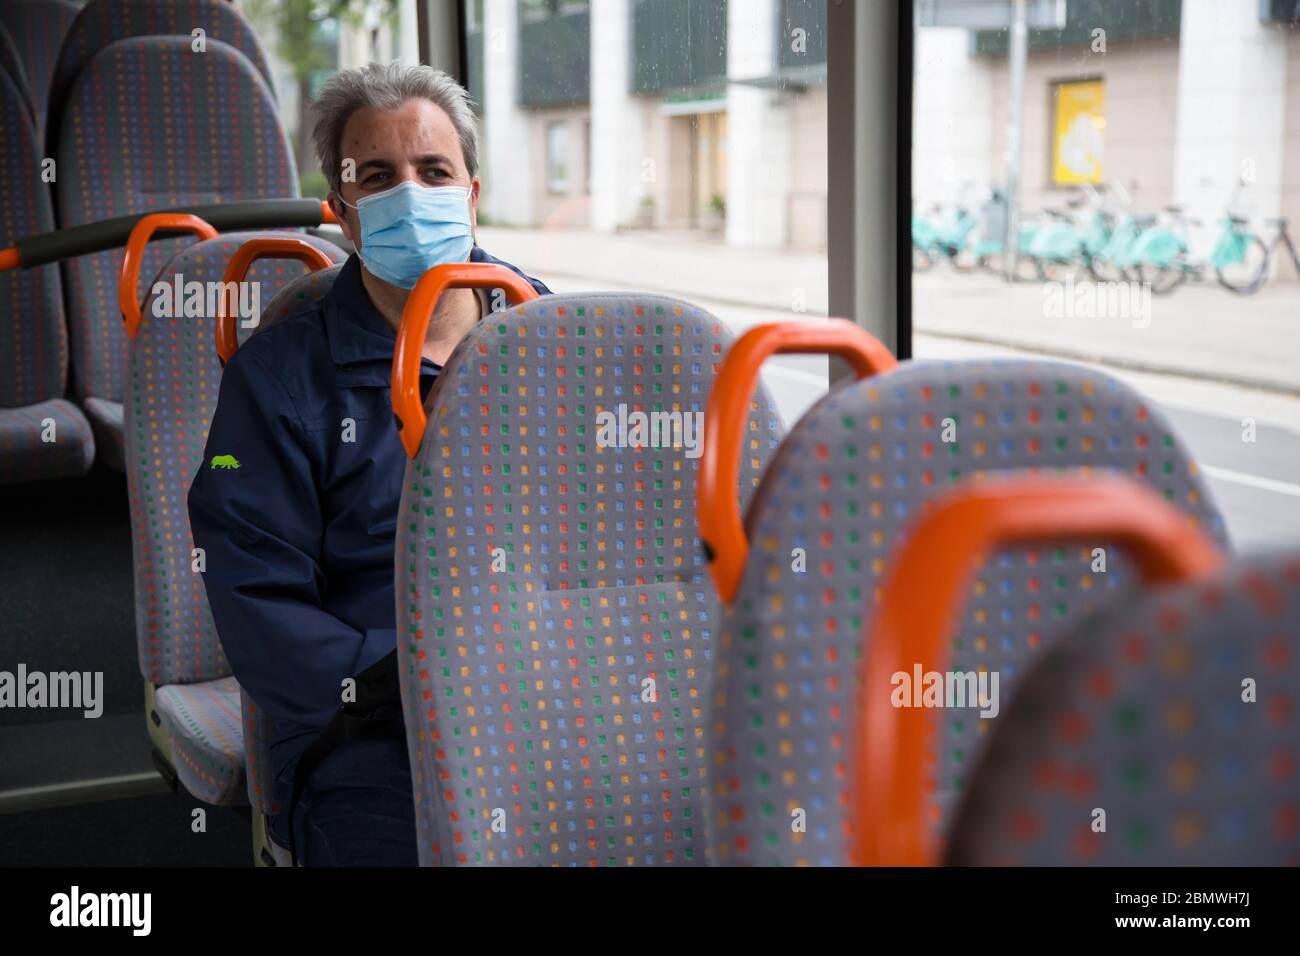 A man inside a bus wearing a face mask as a preventive measure as public transport resumes under strick safety measures.Public transport in Slovenia resumed after two months of Coronavirus (COVID-19) lockdown. Stock Photo